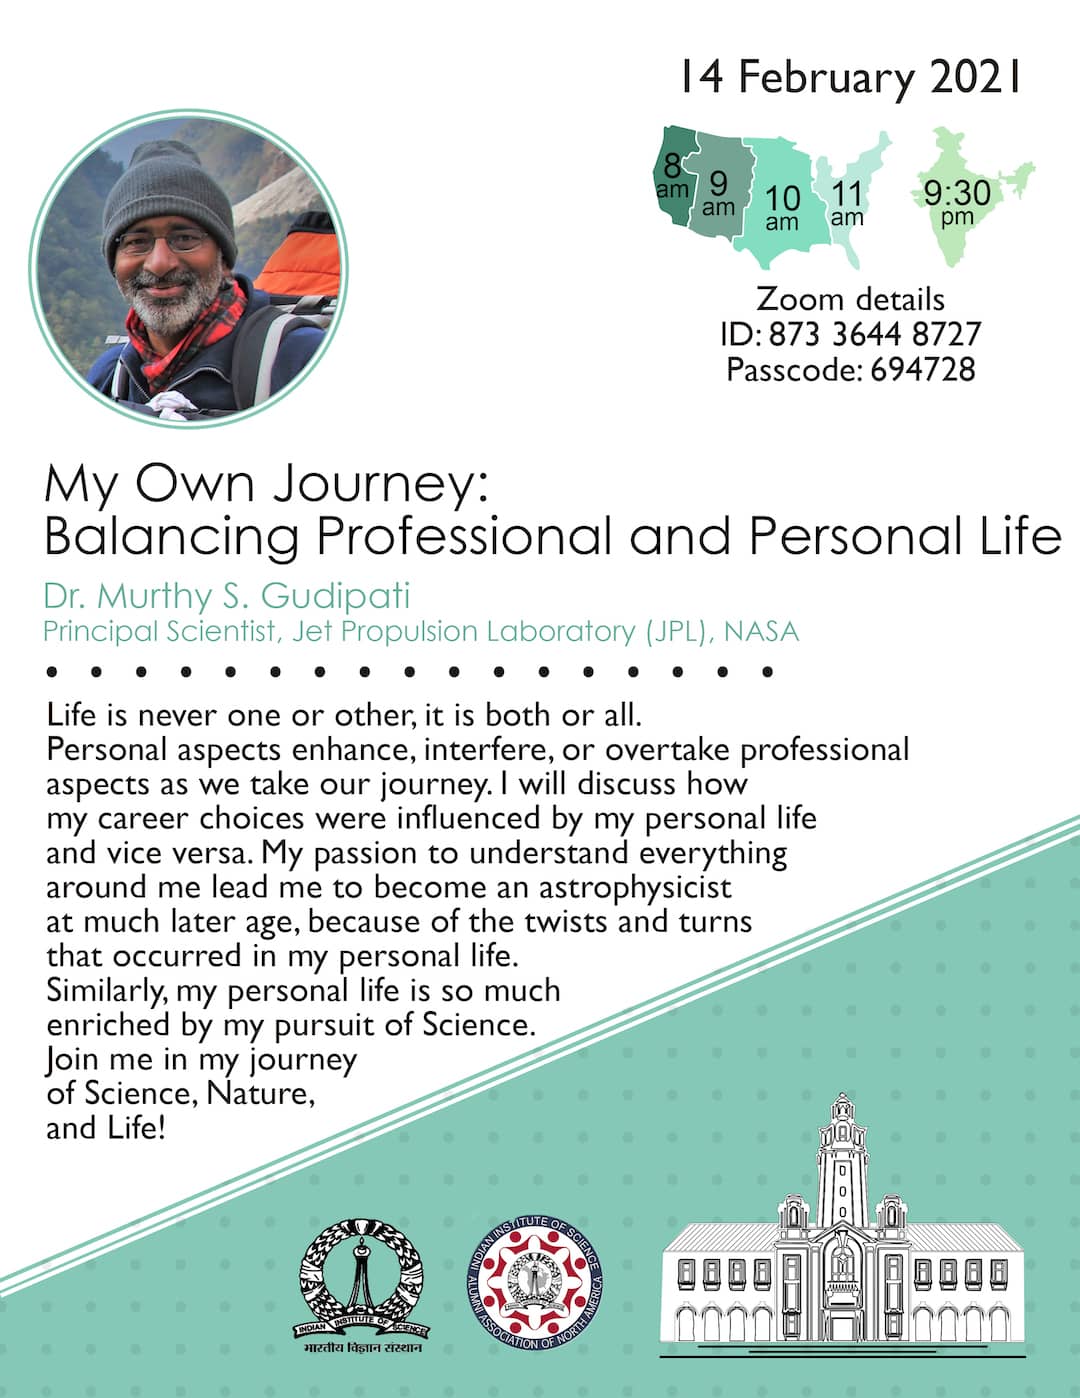 “My Own Journey: Balancing Professional and Personal Life” – Dr. Murthy S. Gudipati